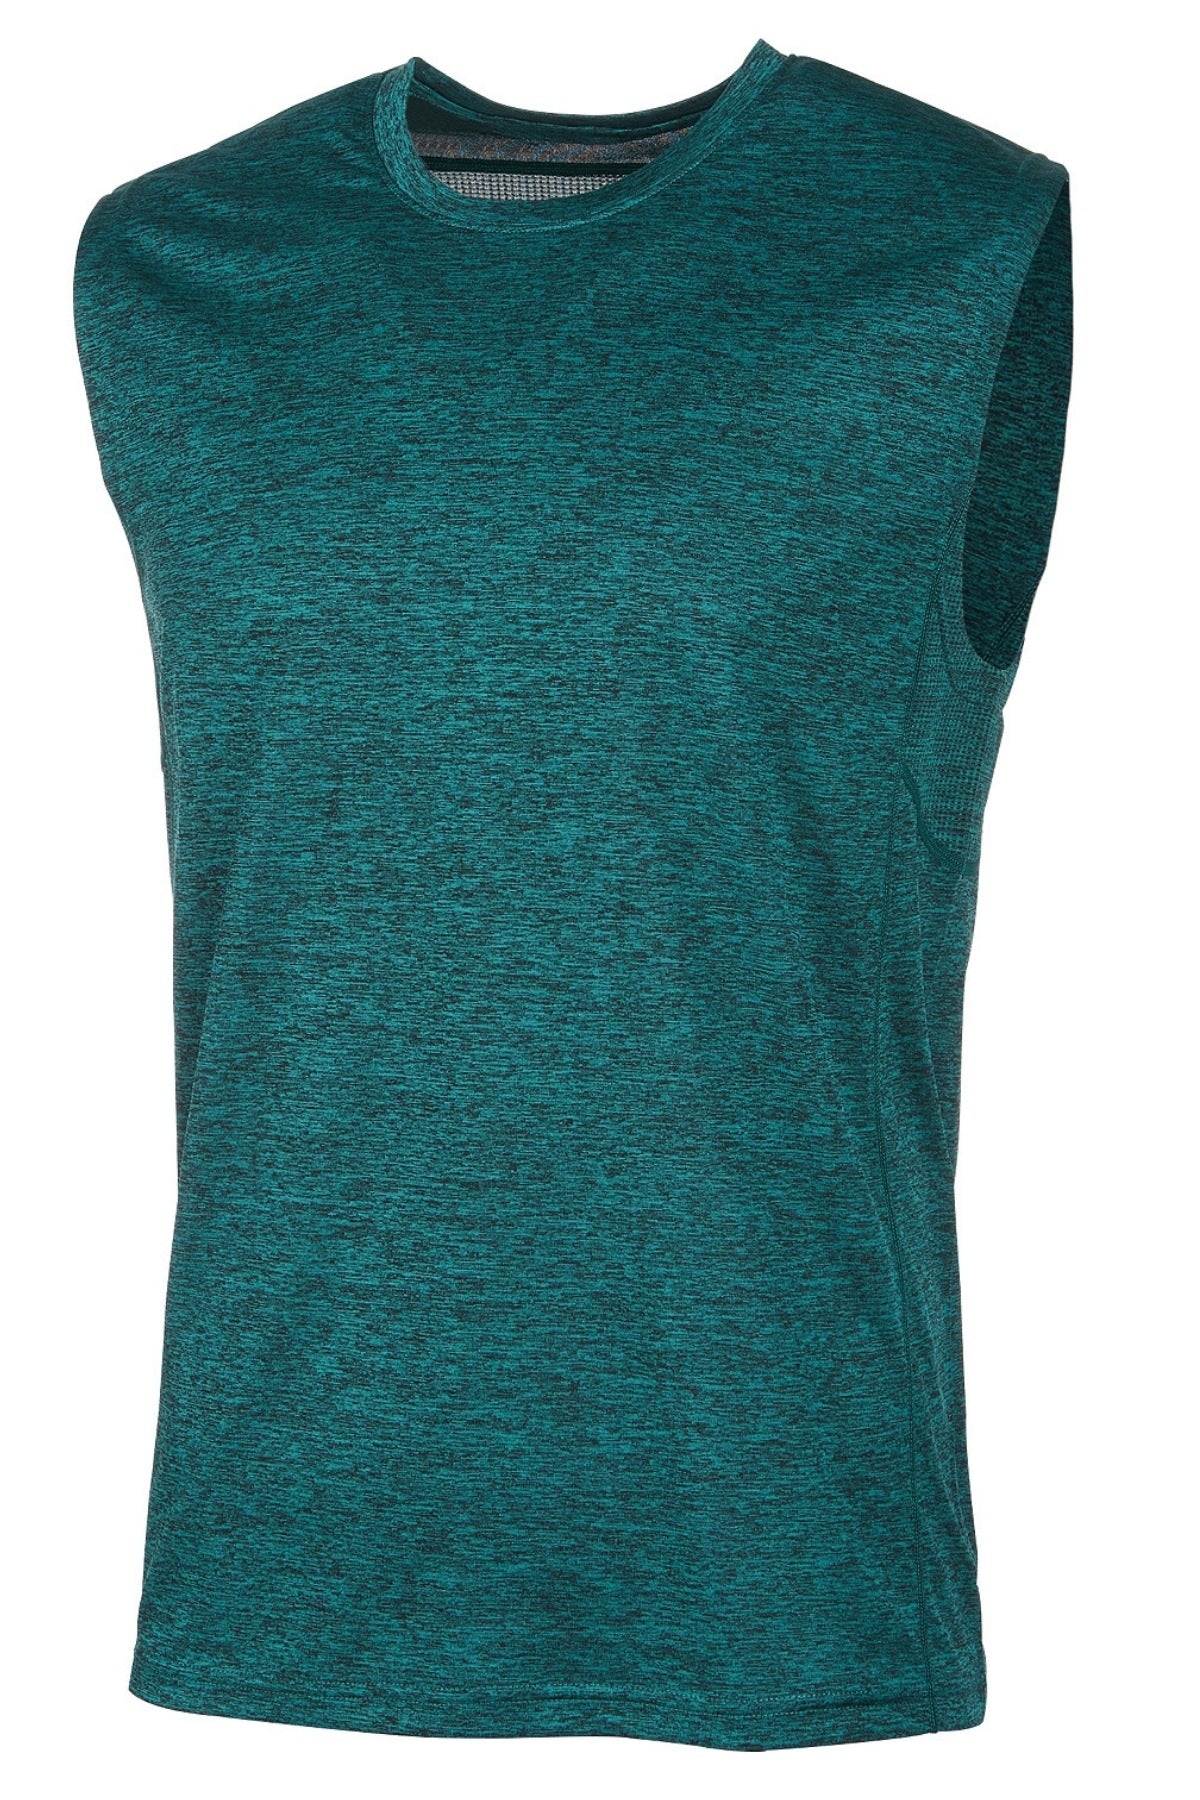 Ideology Bold-Teal Space-Dye Mesh-Trimmed Sleeveless Tee